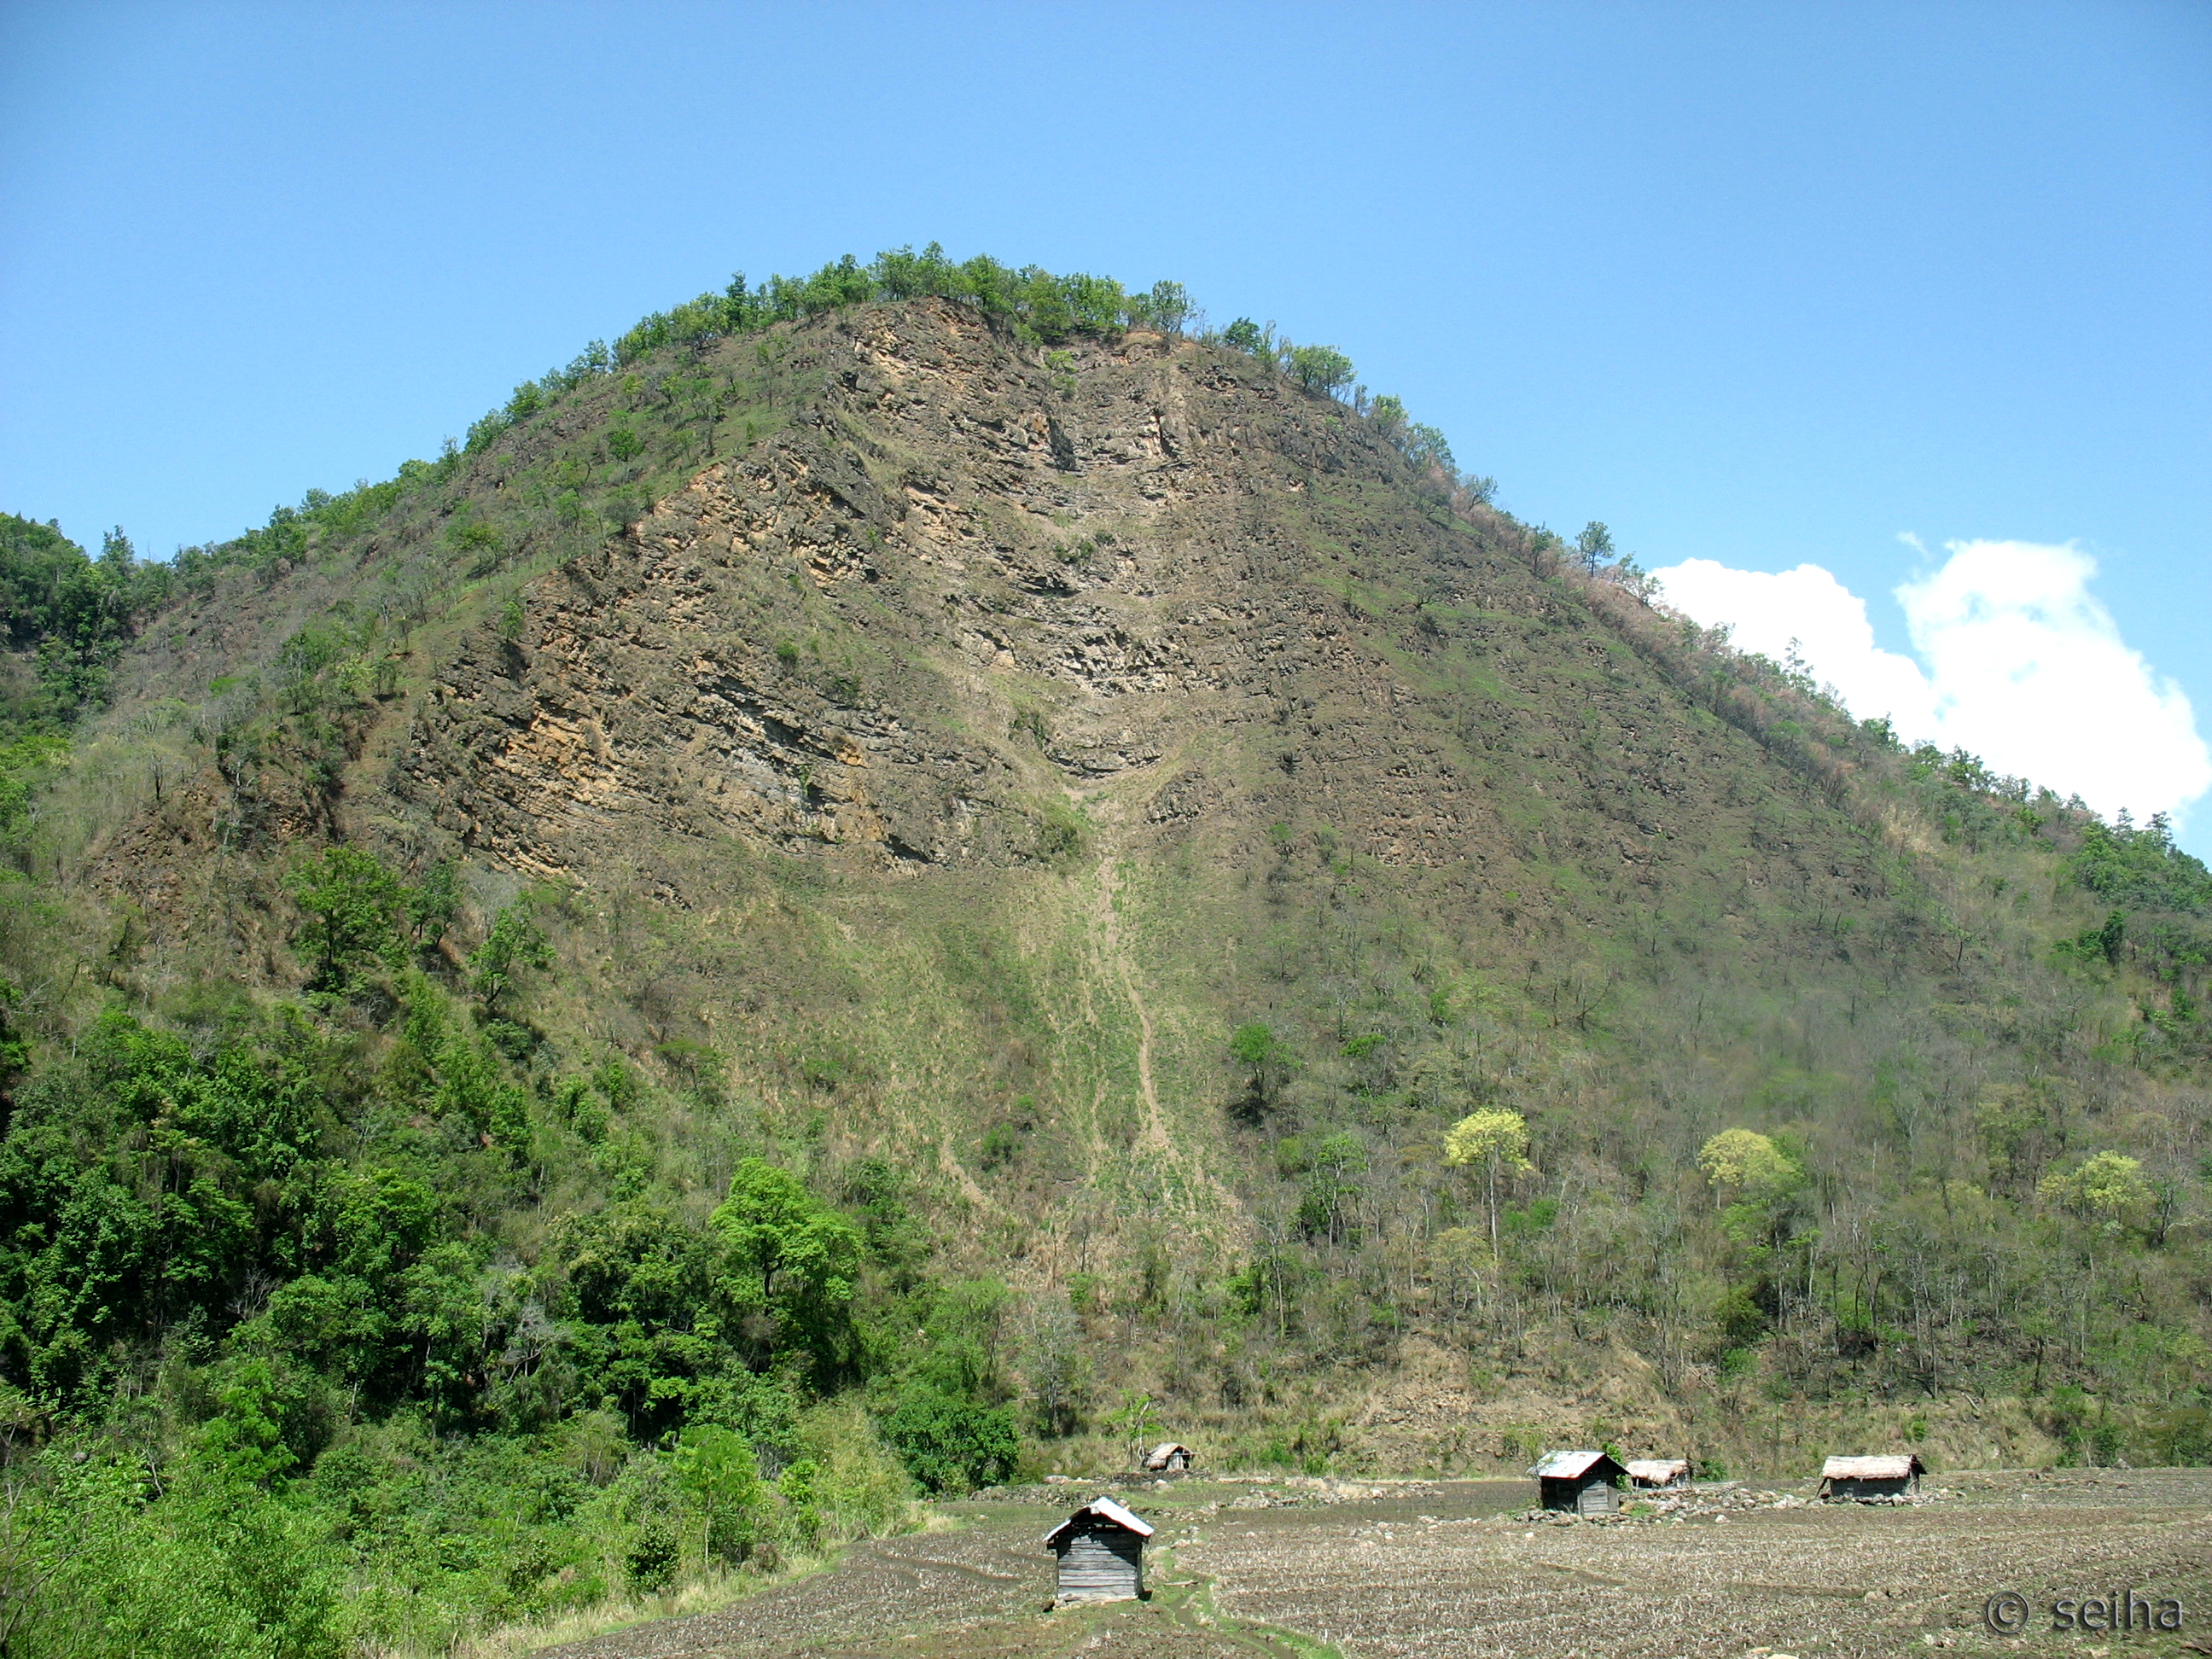 View of the Suicidal cliff of old days.